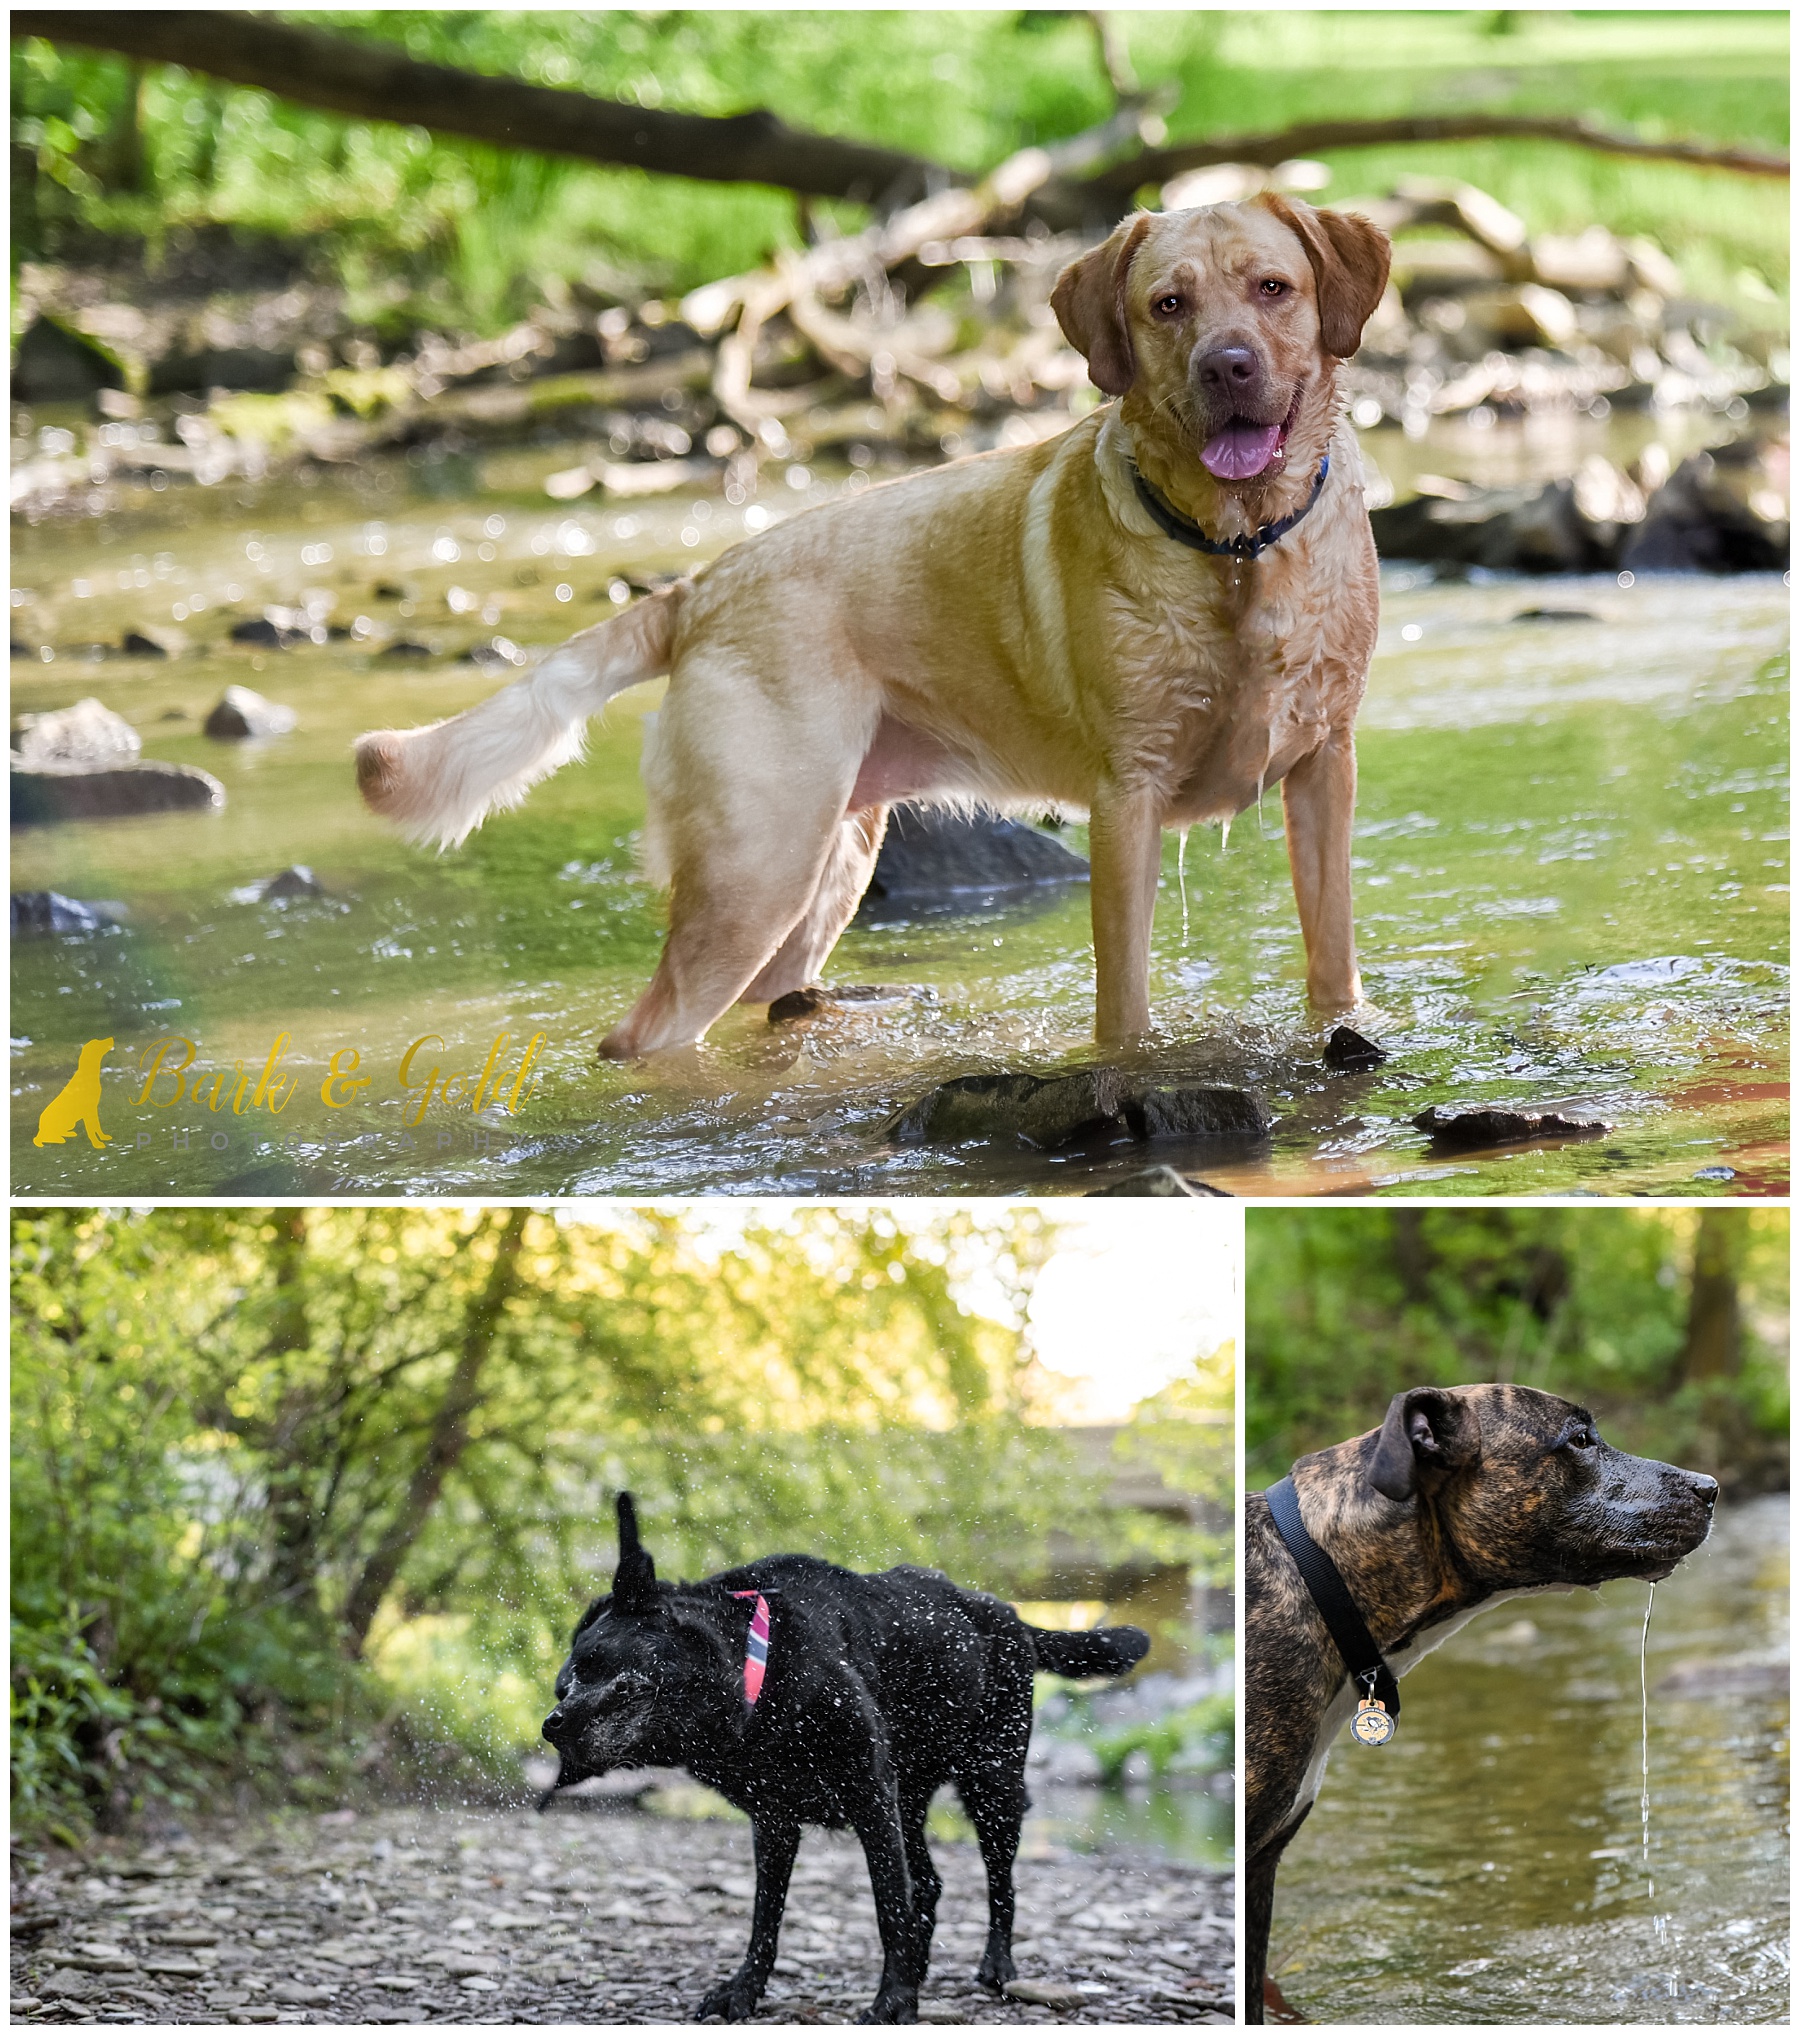 swimming dogs beating the heat in creeks